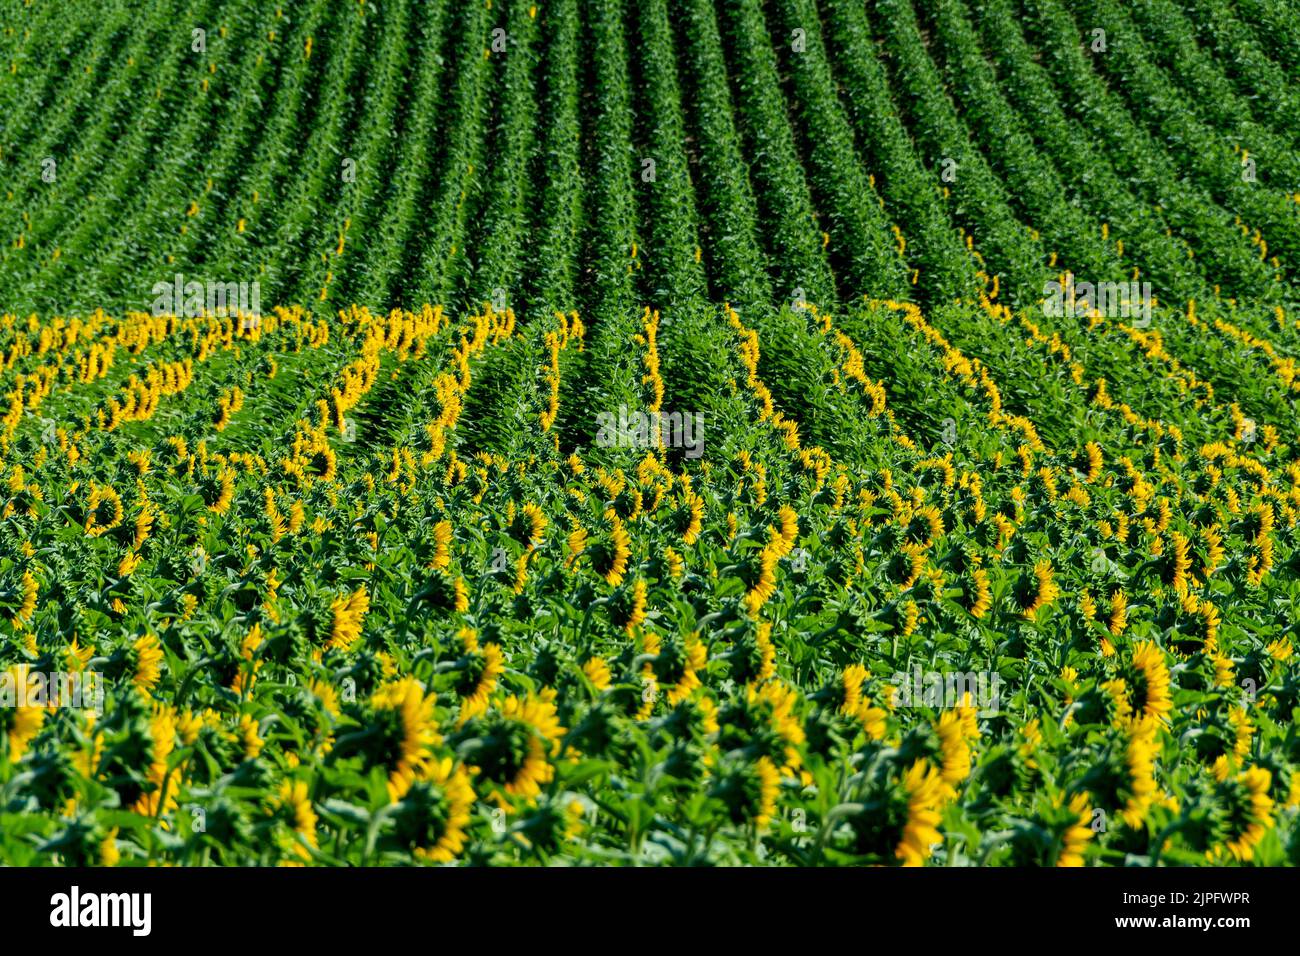 View of growing sunflowers(Helianthus annuus)huge field under blue sky. Auvergne Rhone Alpes, France Stock Photo